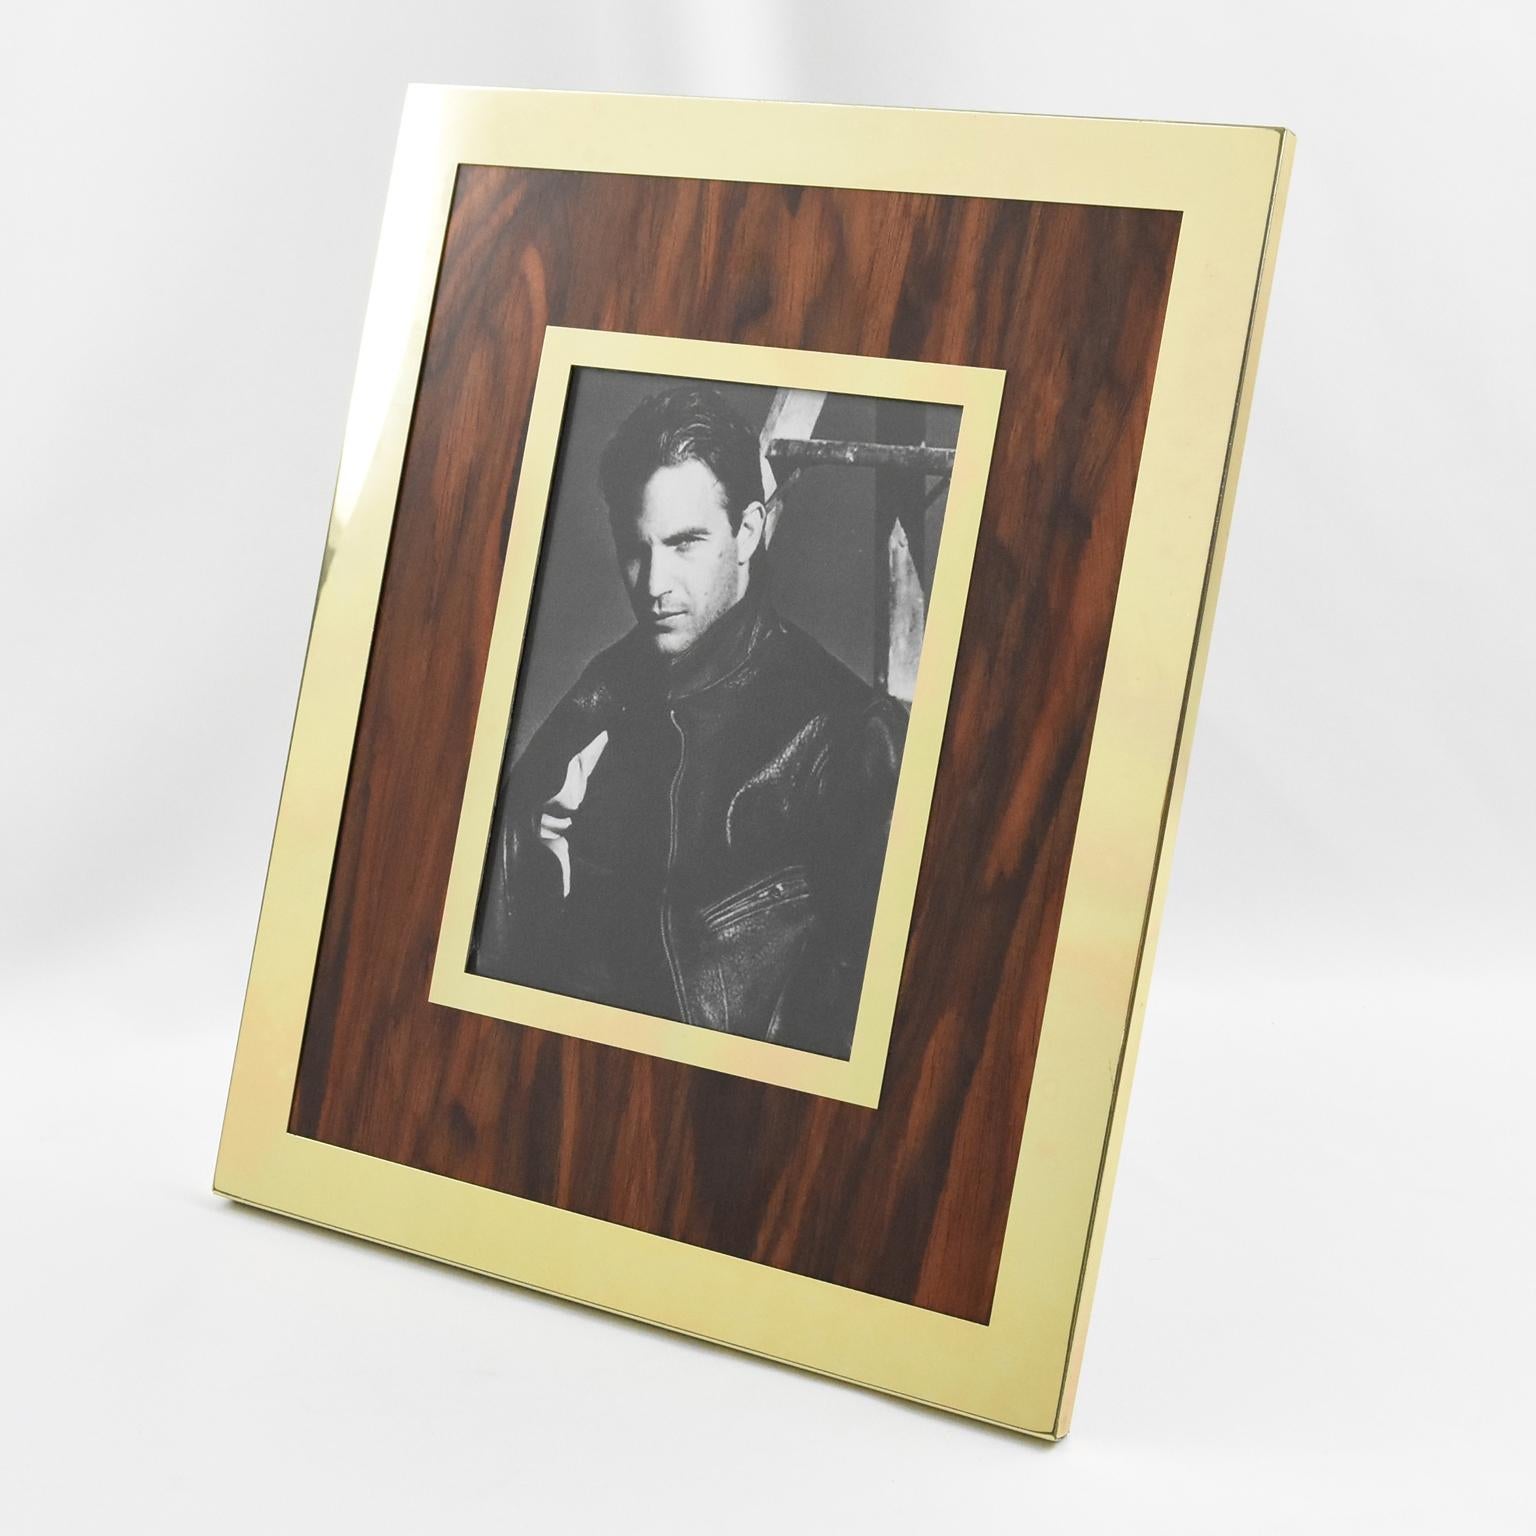 Italian designer Umberto Mascagni crafted this lovely picture photo frame in Bologna, Italy, in the 1970s. The frame features gilded aluminum and Formica flamed-walnut wood imitation. The frame has a metal easel at the back and is marked 